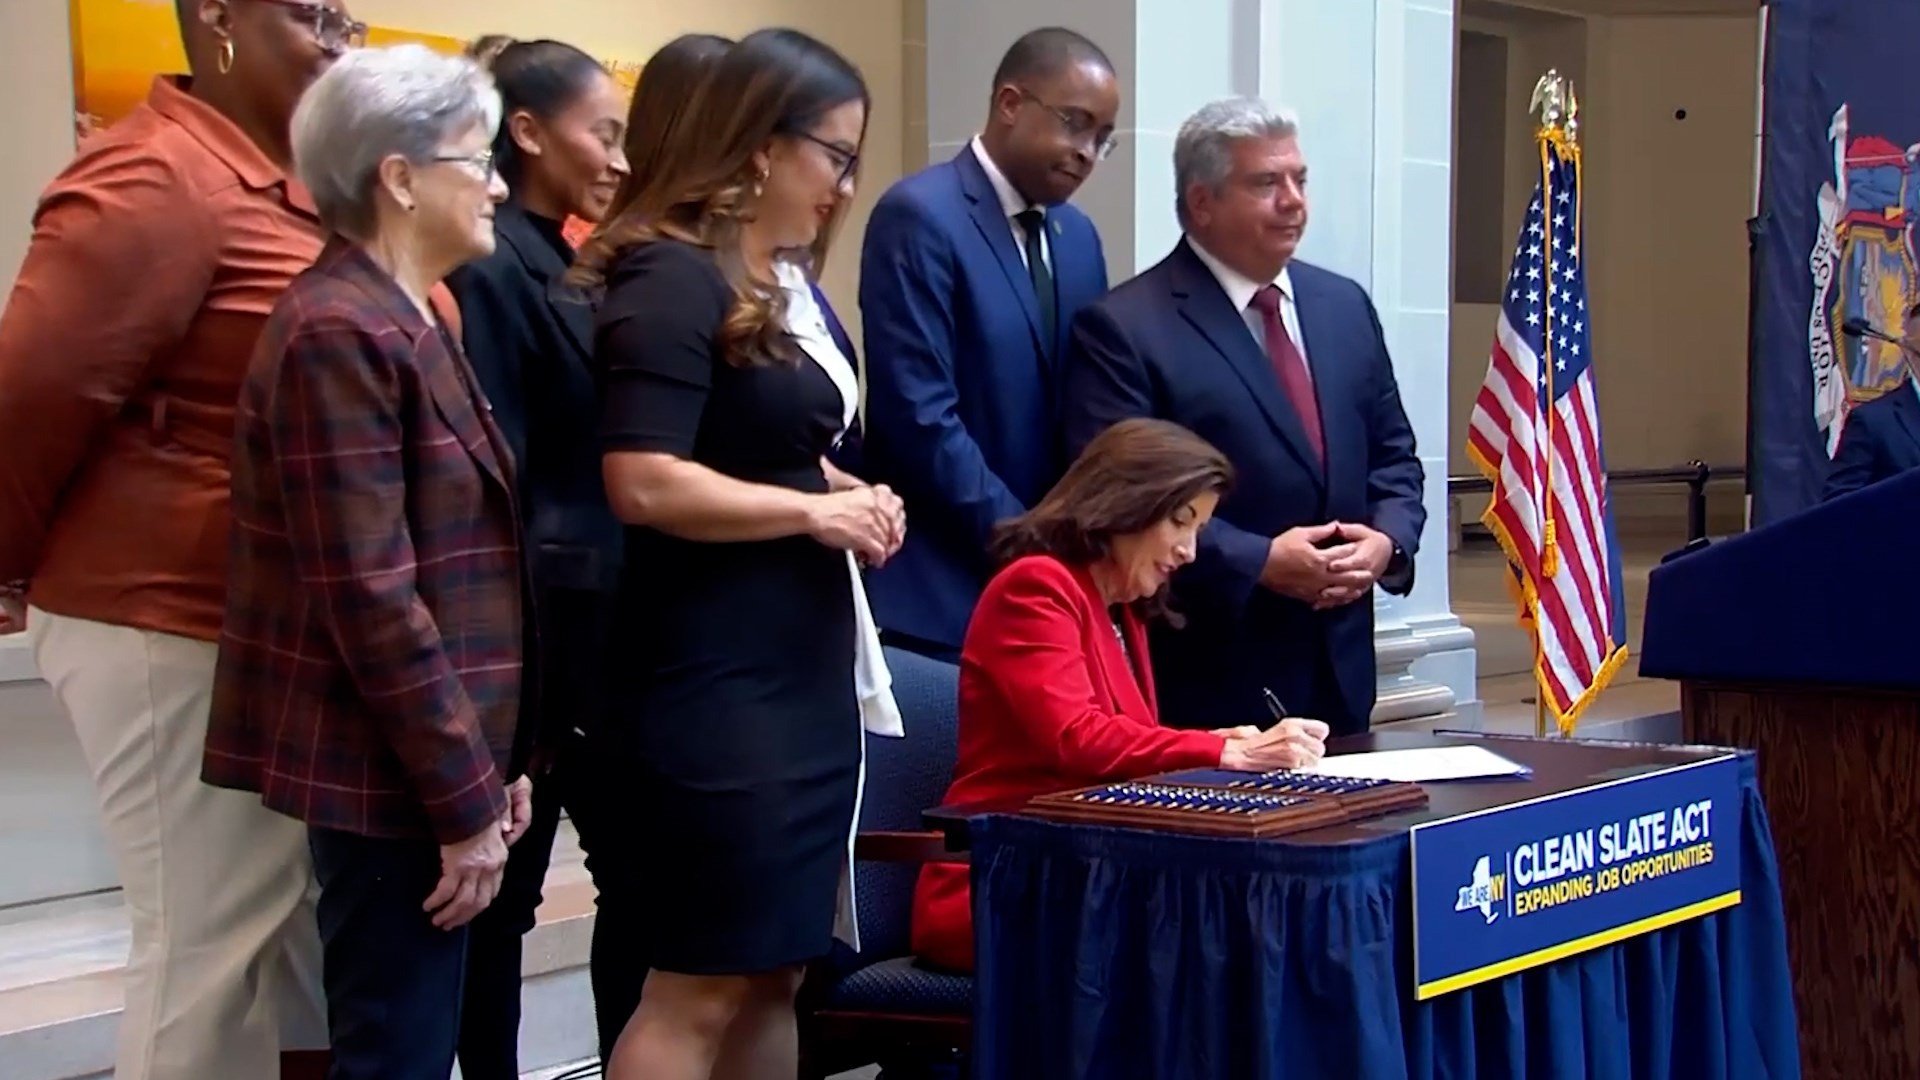 Gov. Hochul signs Clean Slate Act into law